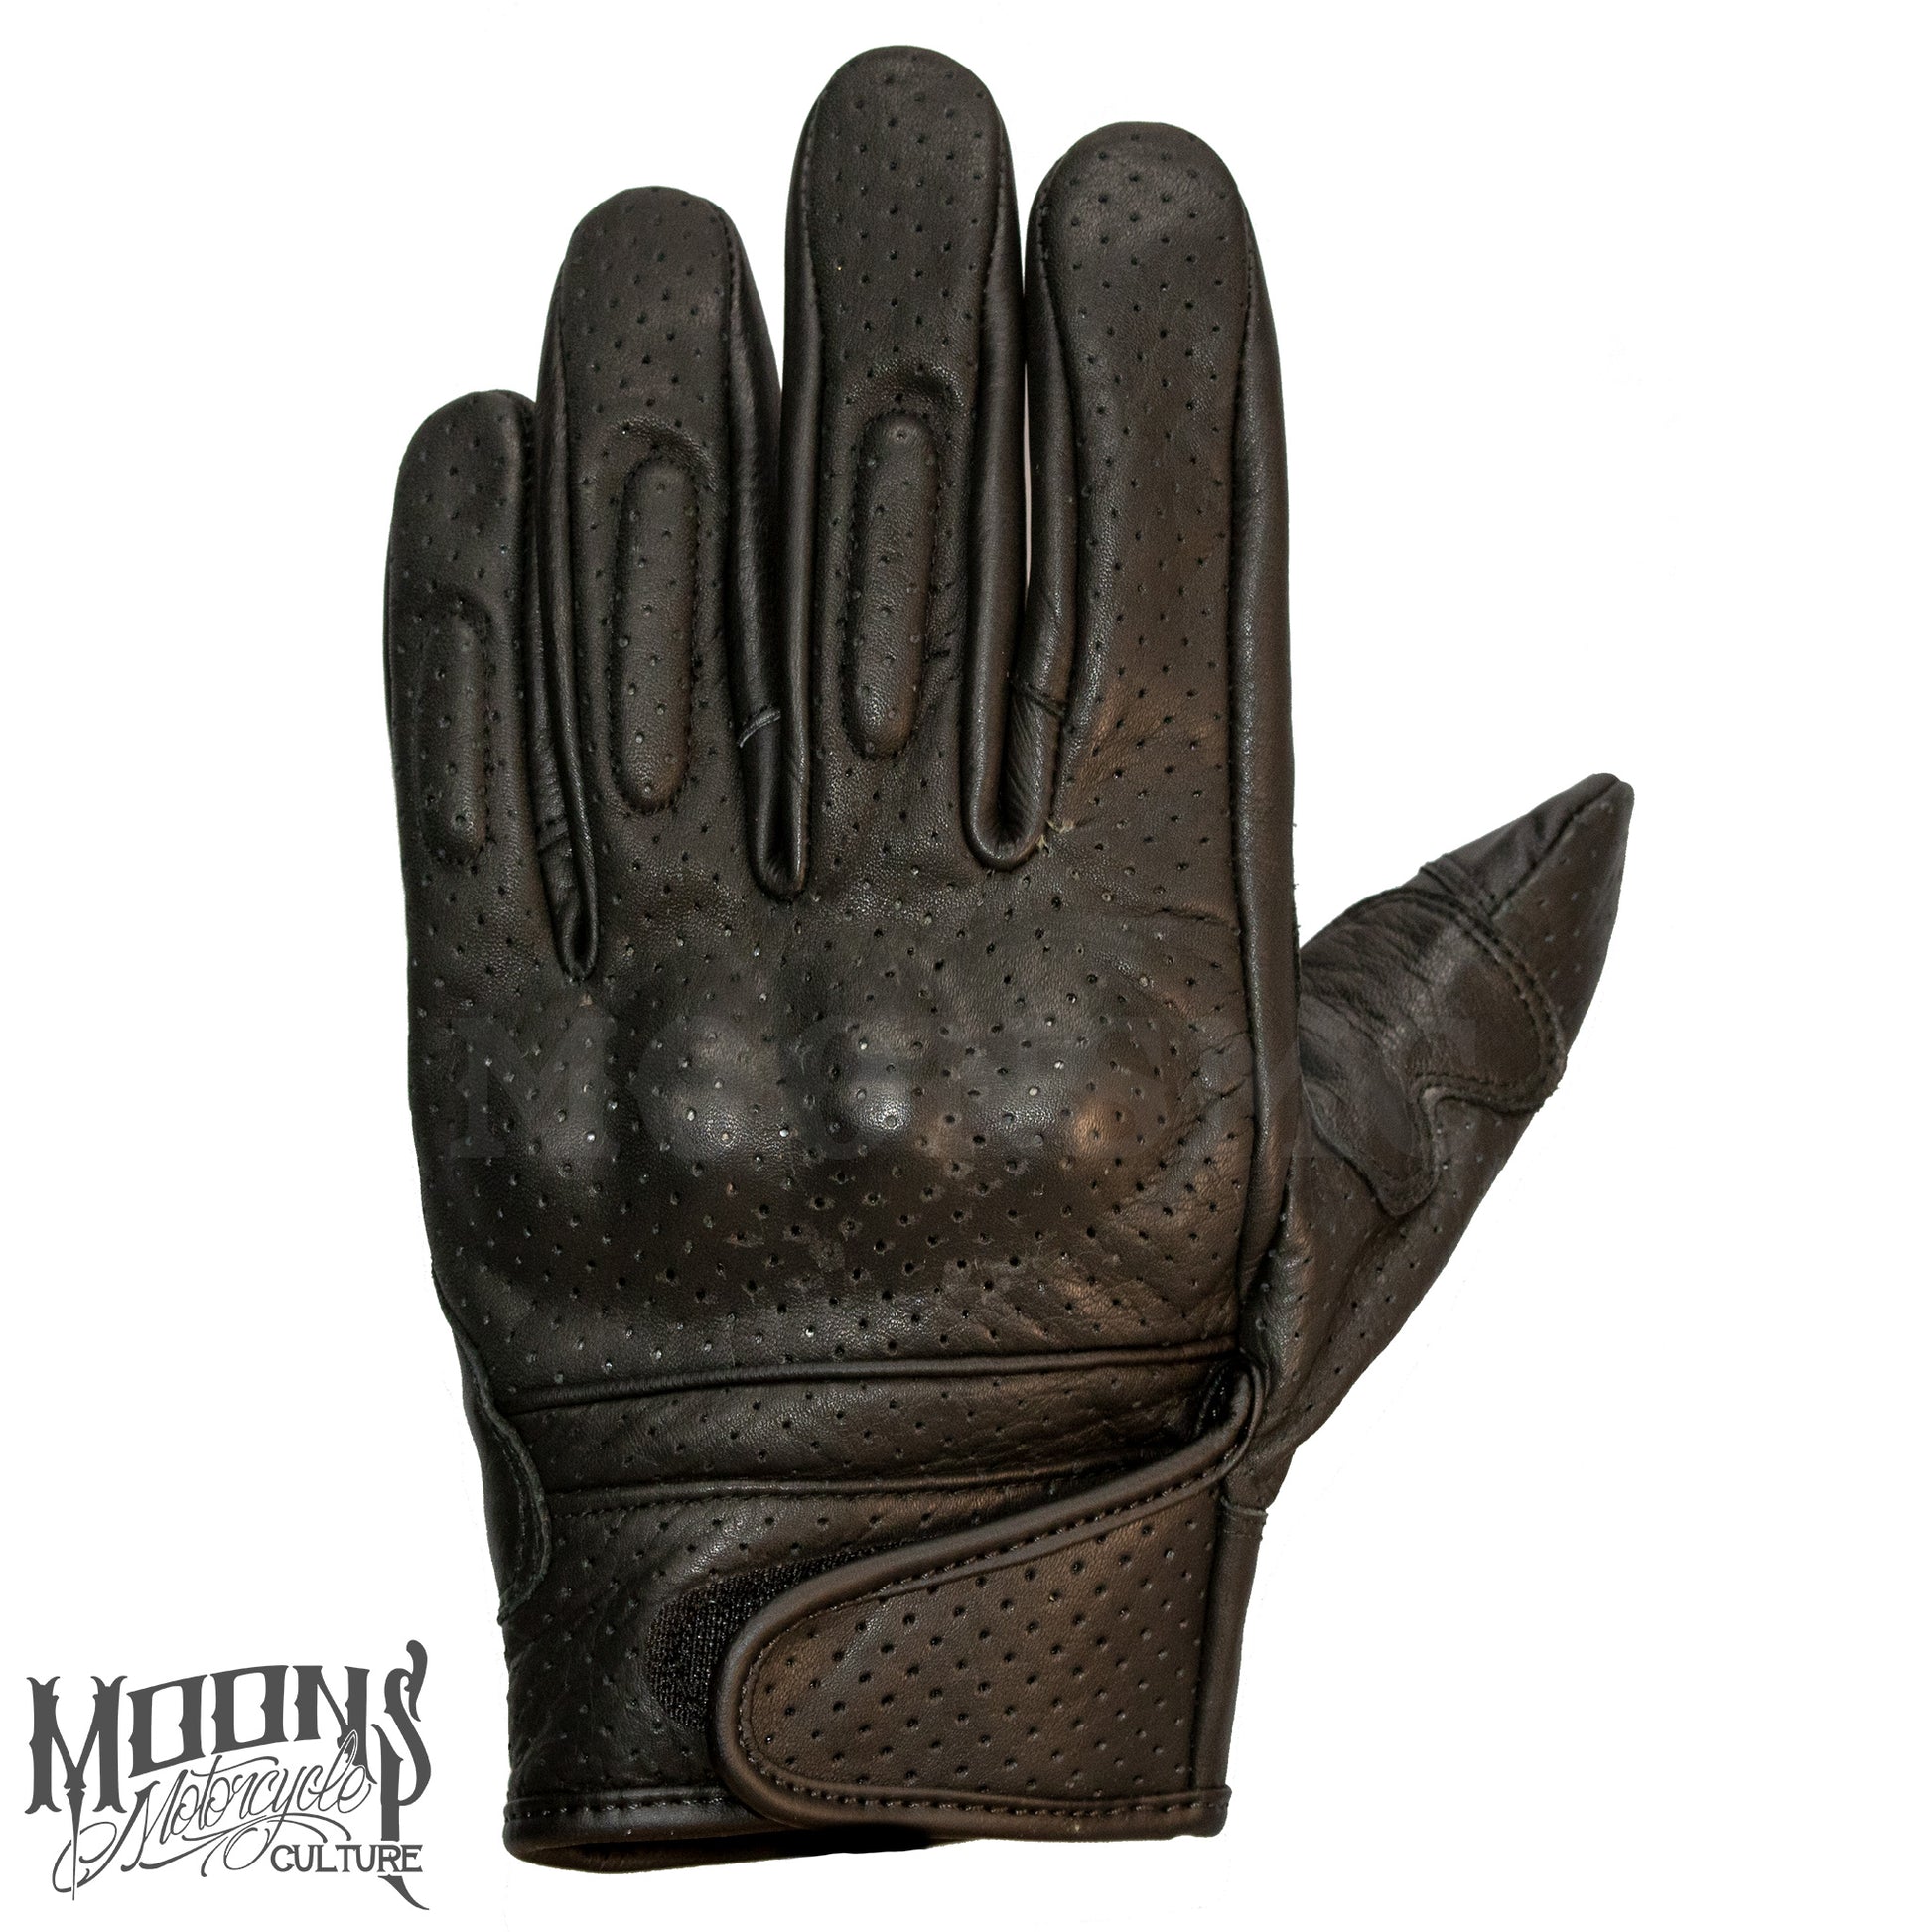 MOONSMC® M-TECH Perforated Gloves, Gloves, MOONS, MOONSMC® // Moons Motorcycle Culture